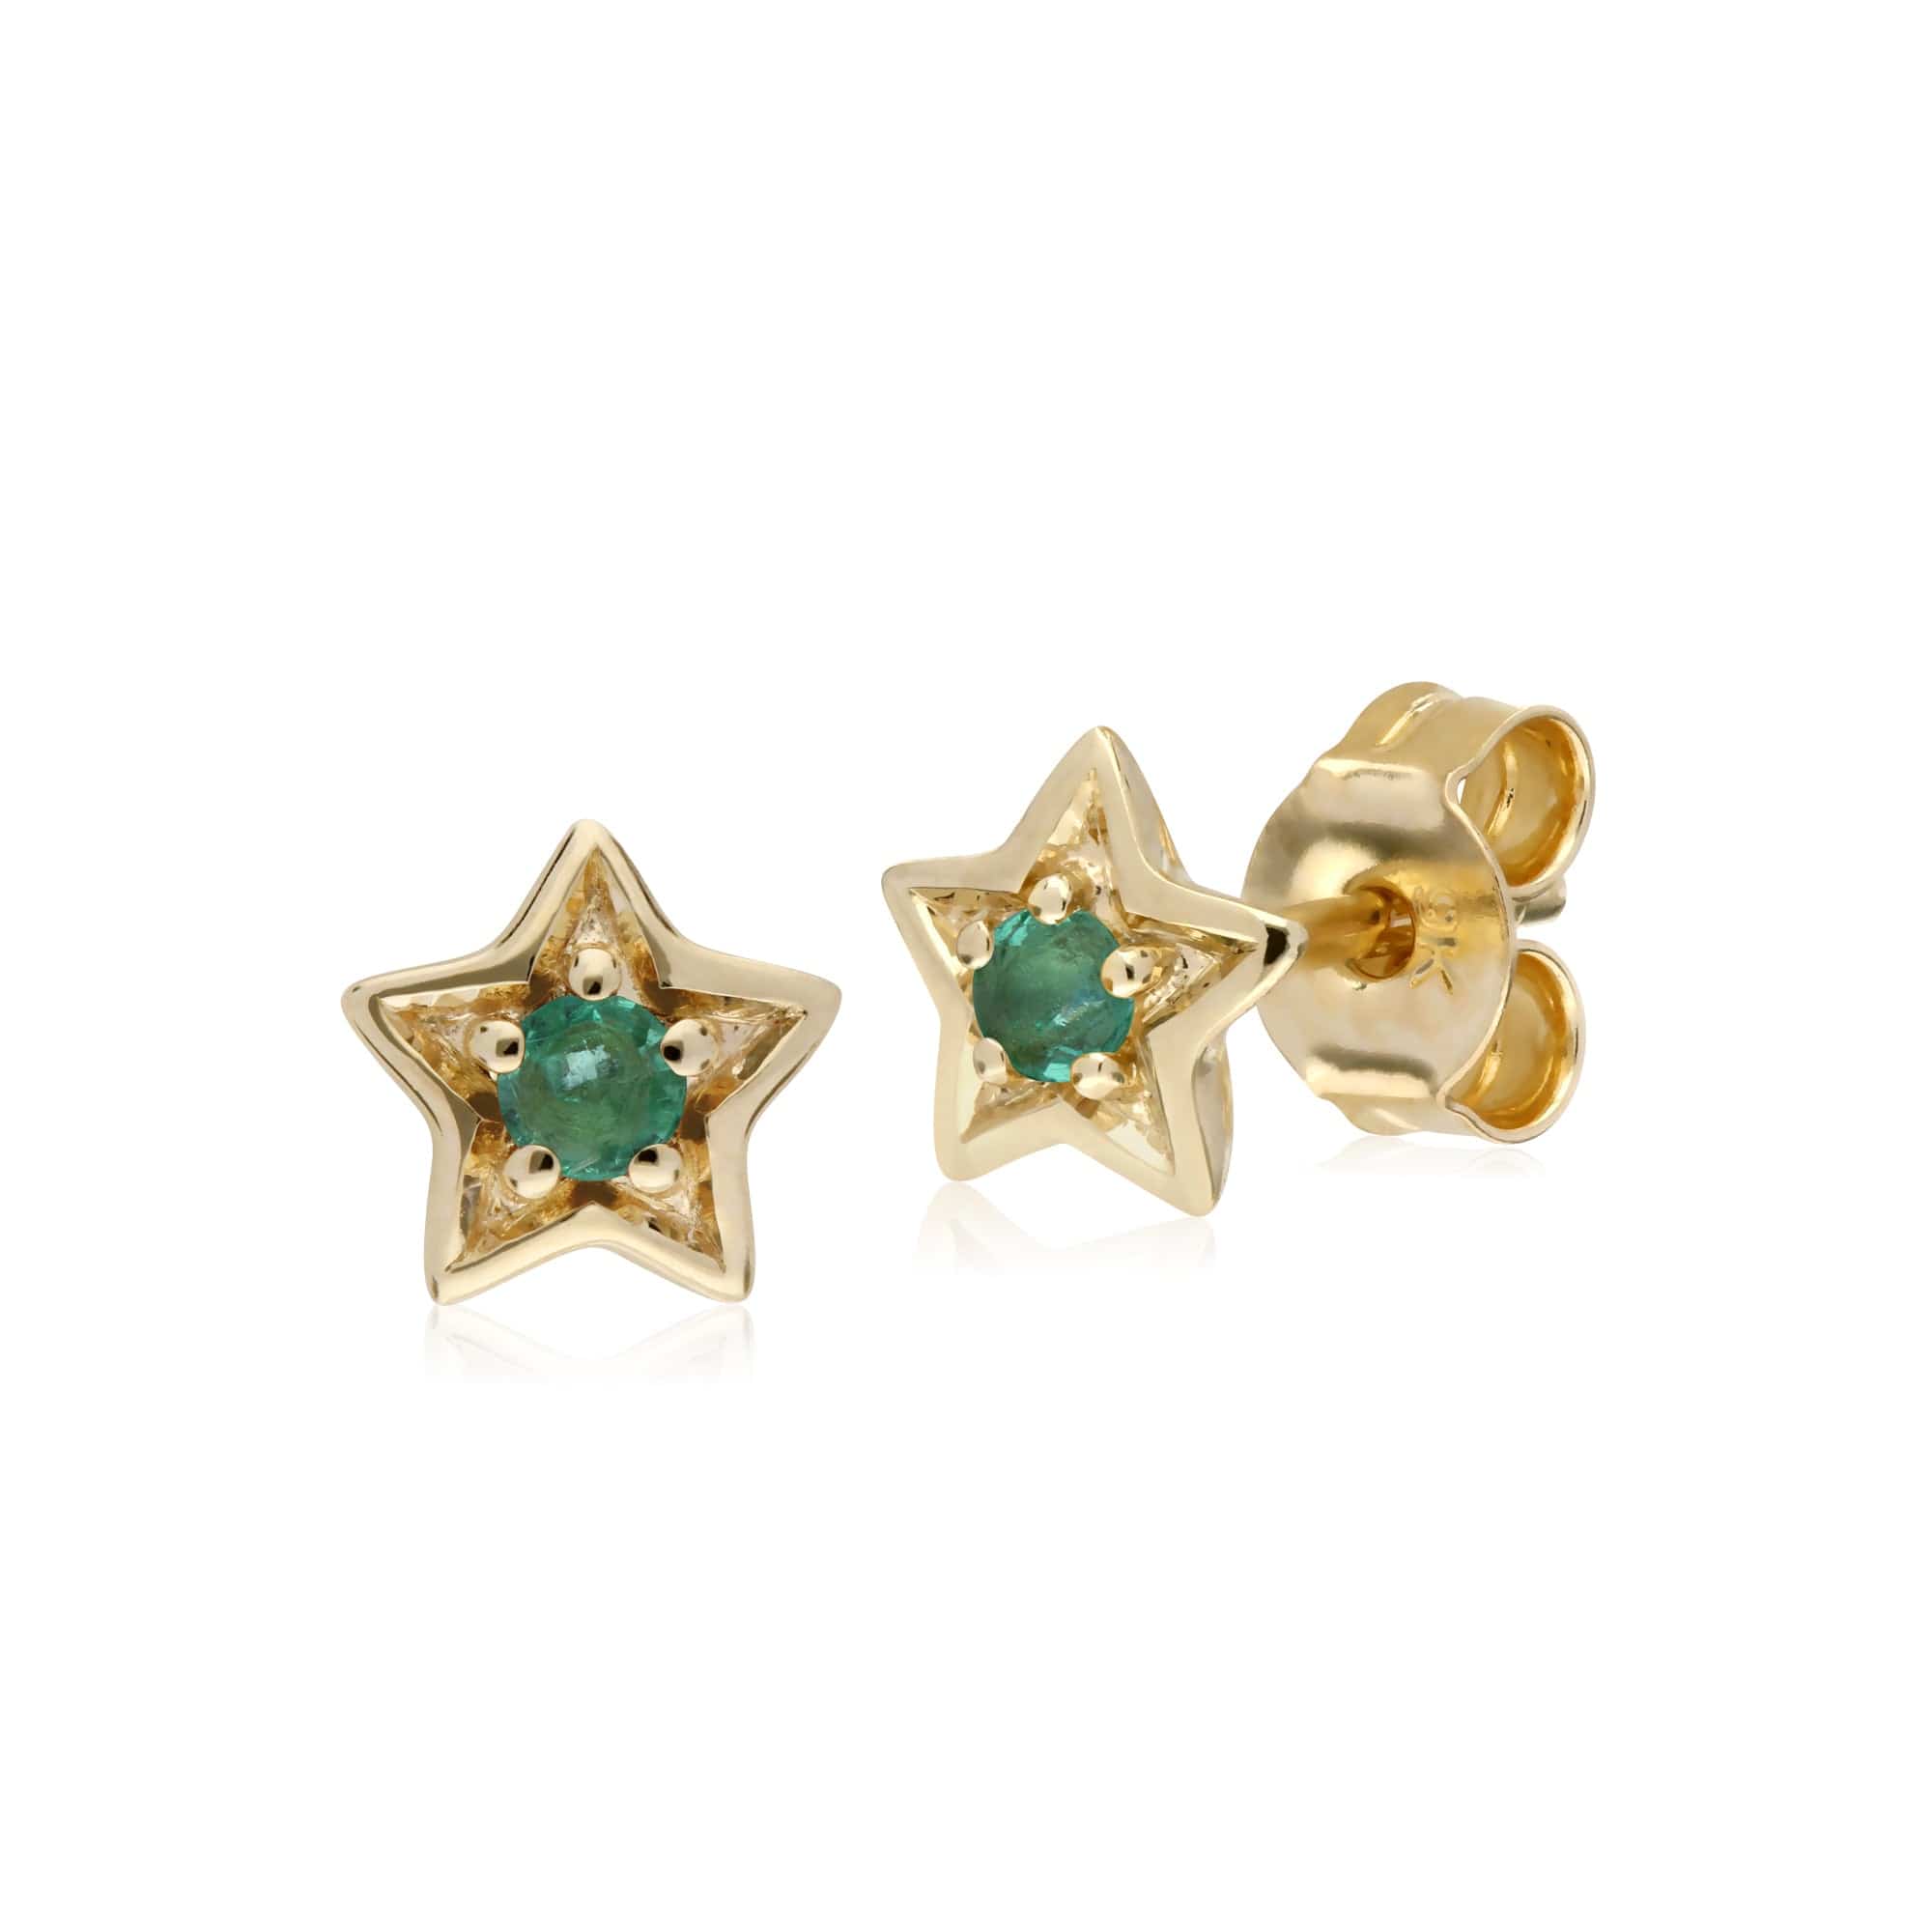 135E1523039-135P1874039 Contemporary Round Emerald Single Stone Star Earrings & Necklace Set in 9ct Yellow Gold 2